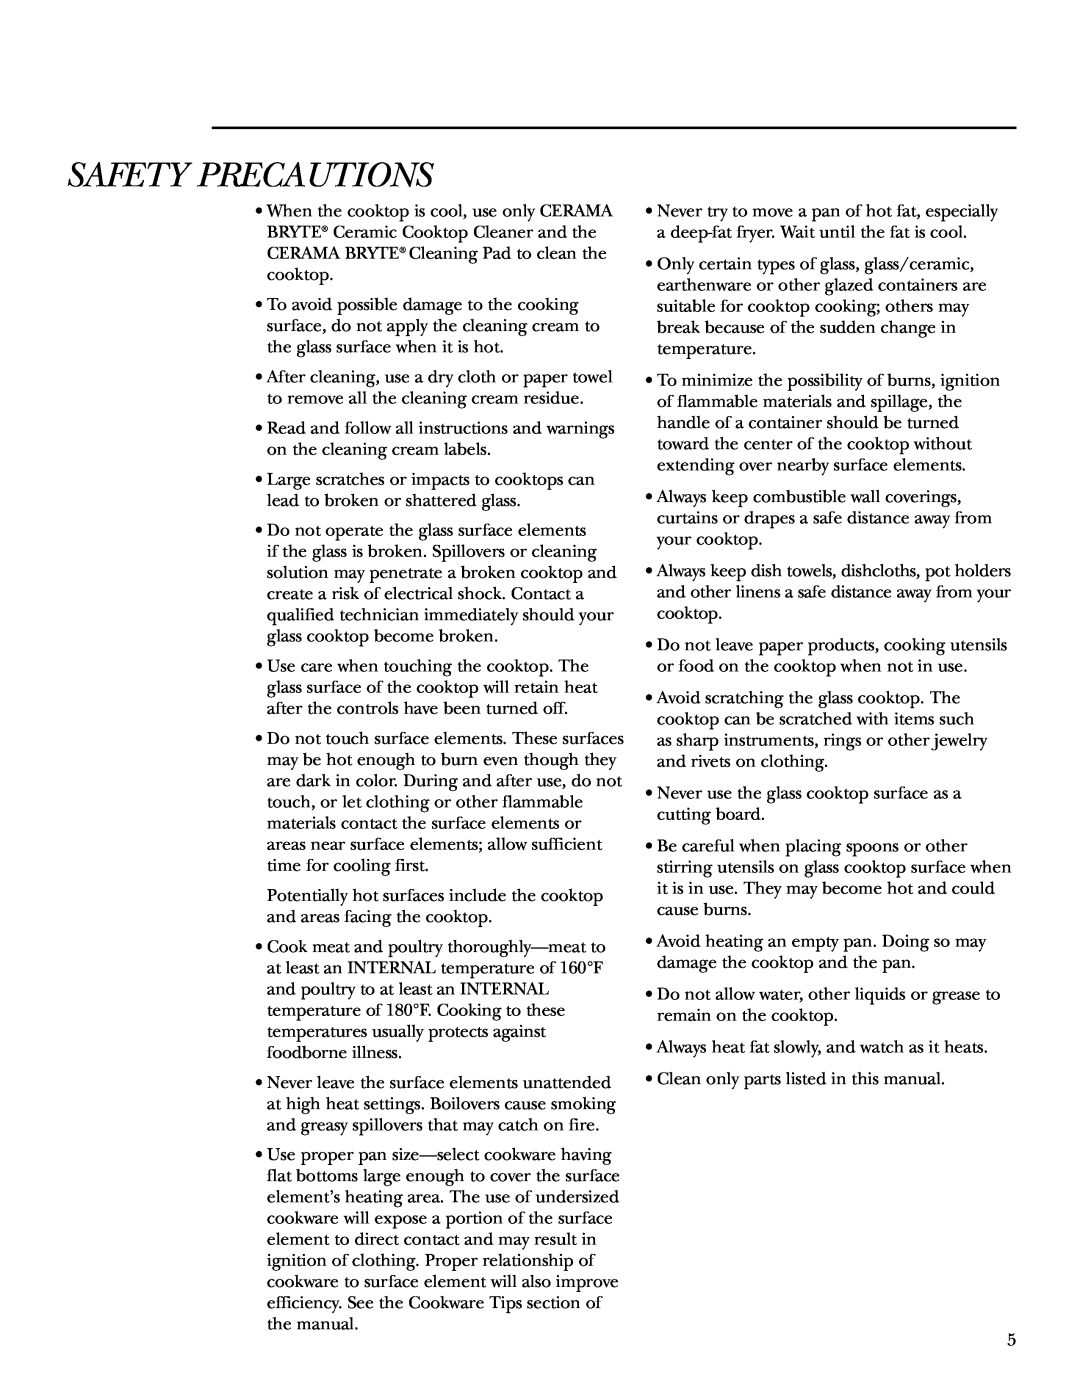 GE ZEU36K owner manual Safety Precautions, Never use the glass cooktop surface as a cutting board 